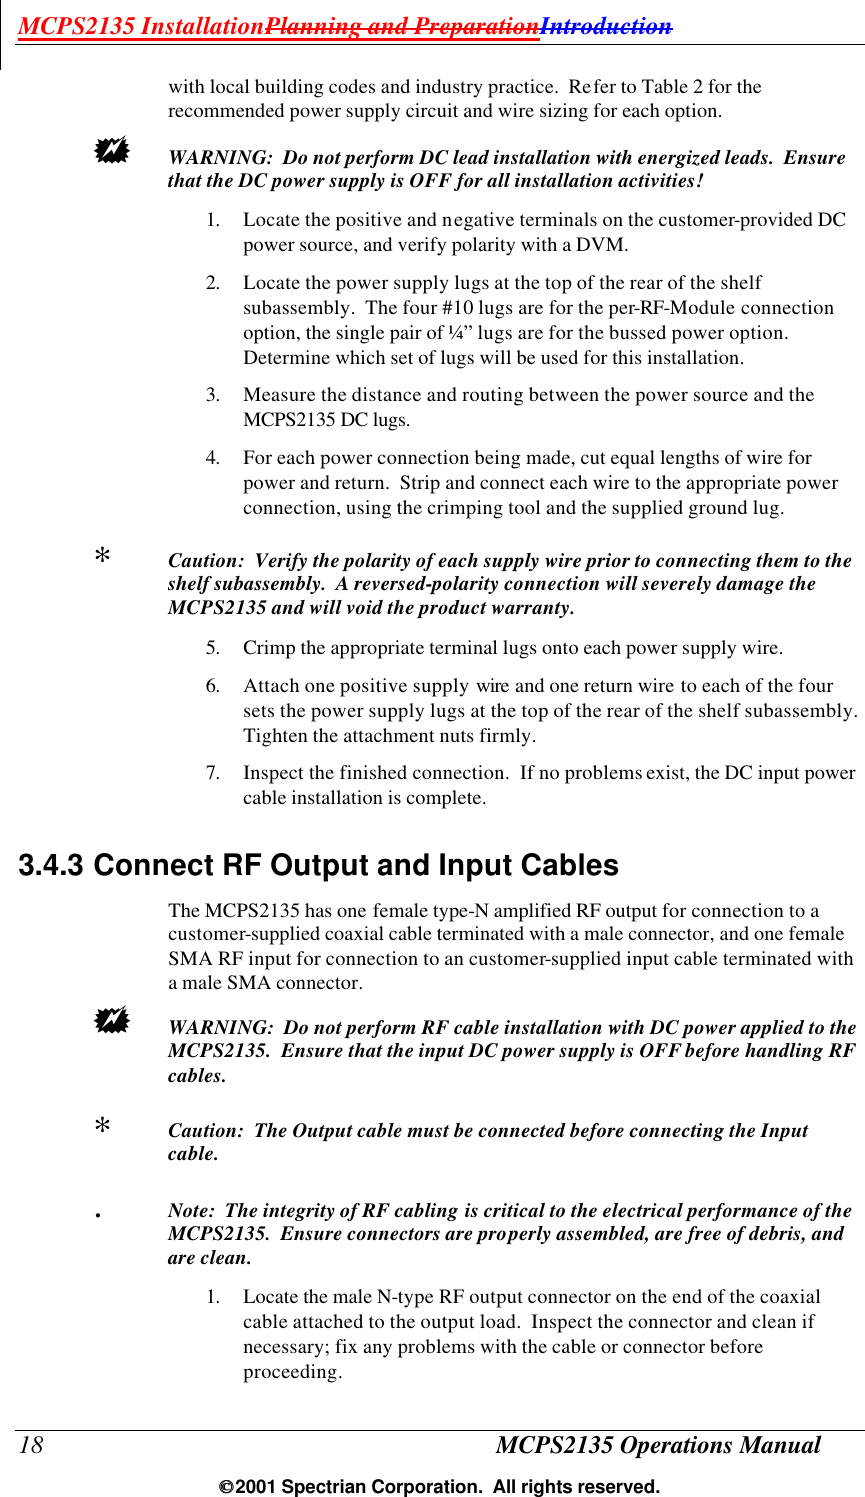 MCPS2135 InstallationPlanning and PreparationIntroduction 18 MCPS2135 Operations Manual  2001 Spectrian Corporation.  All rights reserved. with local building codes and industry practice.  Refer to Table 2 for the recommended power supply circuit and wire sizing for each option.  +  WARNING:  Do not perform DC lead installation with energized leads.  Ensure that the DC power supply is OFF for all installation activities! 1. Locate the positive and negative terminals on the customer-provided DC power source, and verify polarity with a DVM. 2. Locate the power supply lugs at the top of the rear of the shelf subassembly.  The four #10 lugs are for the per-RF-Module connection option, the single pair of ¼” lugs are for the bussed power option.  Determine which set of lugs will be used for this installation. 3. Measure the distance and routing between the power source and the MCPS2135 DC lugs.  4. For each power connection being made, cut equal lengths of wire for power and return.  Strip and connect each wire to the appropriate power connection, using the crimping tool and the supplied ground lug. ∗  Caution:  Verify the polarity of each supply wire prior to connecting them to the shelf subassembly.  A reversed-polarity connection will severely damage the MCPS2135 and will void the product warranty. 5. Crimp the appropriate terminal lugs onto each power supply wire. 6. Attach one positive supply wire and one return wire to each of the four sets the power supply lugs at the top of the rear of the shelf subassembly. Tighten the attachment nuts firmly. 7. Inspect the finished connection.  If no problems exist, the DC input power cable installation is complete. 3.4.3 Connect RF Output and Input Cables The MCPS2135 has one female type-N amplified RF output for connection to a customer-supplied coaxial cable terminated with a male connector, and one female SMA RF input for connection to an customer-supplied input cable terminated with a male SMA connector. +  WARNING:  Do not perform RF cable installation with DC power applied to the MCPS2135.  Ensure that the input DC power supply is OFF before handling RF cables. ∗  Caution:  The Output cable must be connected before connecting the Input cable. .  Note:  The integrity of RF cabling is critical to the electrical performance of the MCPS2135.  Ensure connectors are properly assembled, are free of debris, and are clean. 1. Locate the male N-type RF output connector on the end of the coaxial cable attached to the output load.  Inspect the connector and clean if necessary; fix any problems with the cable or connector before proceeding. 